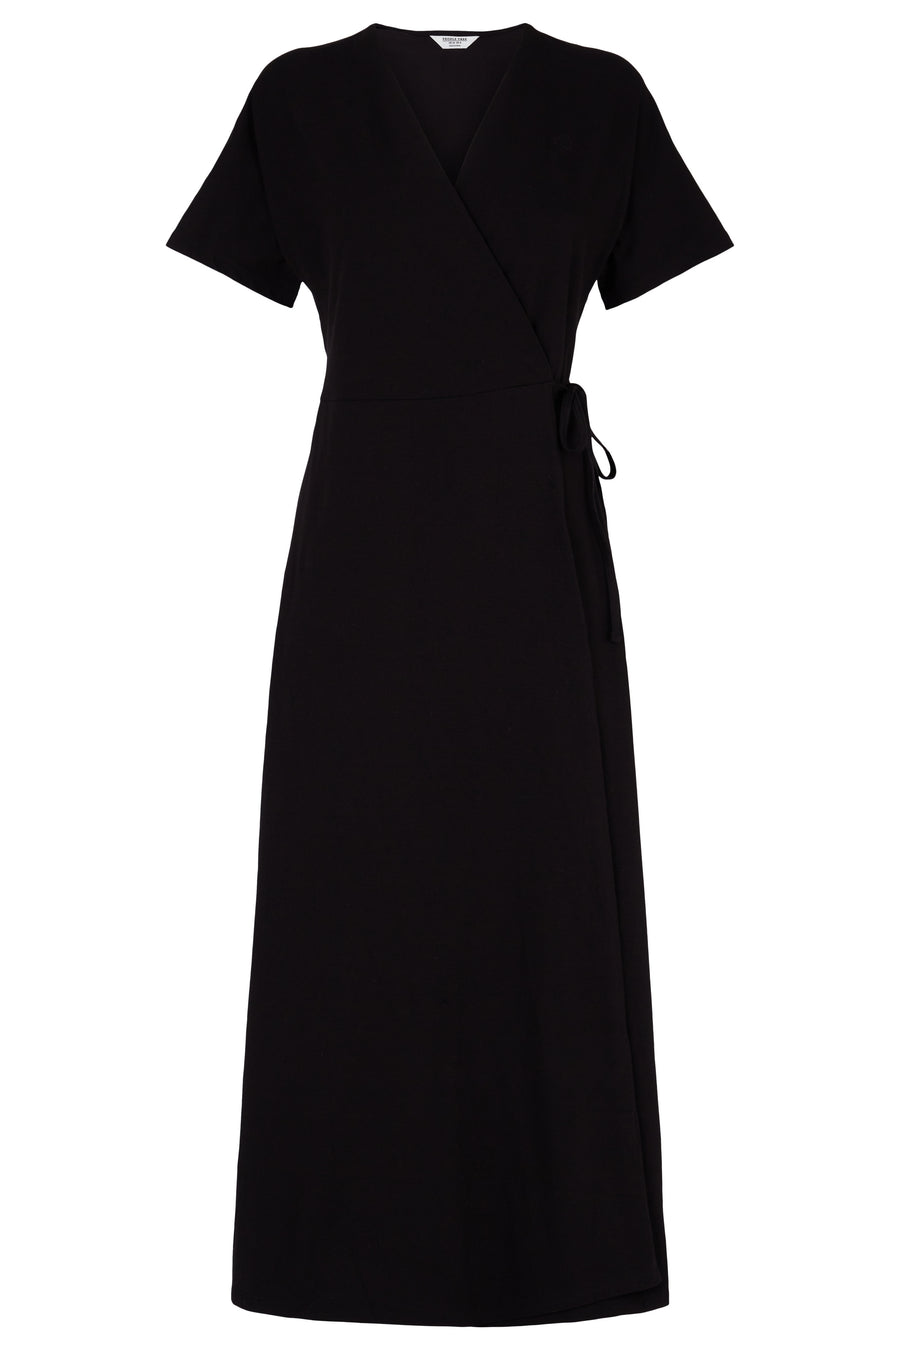 People Tree Fair Trade, Ethical & Sustainable Leora Wrap Dress in Black 95% organic certified cotton, 5% elastane